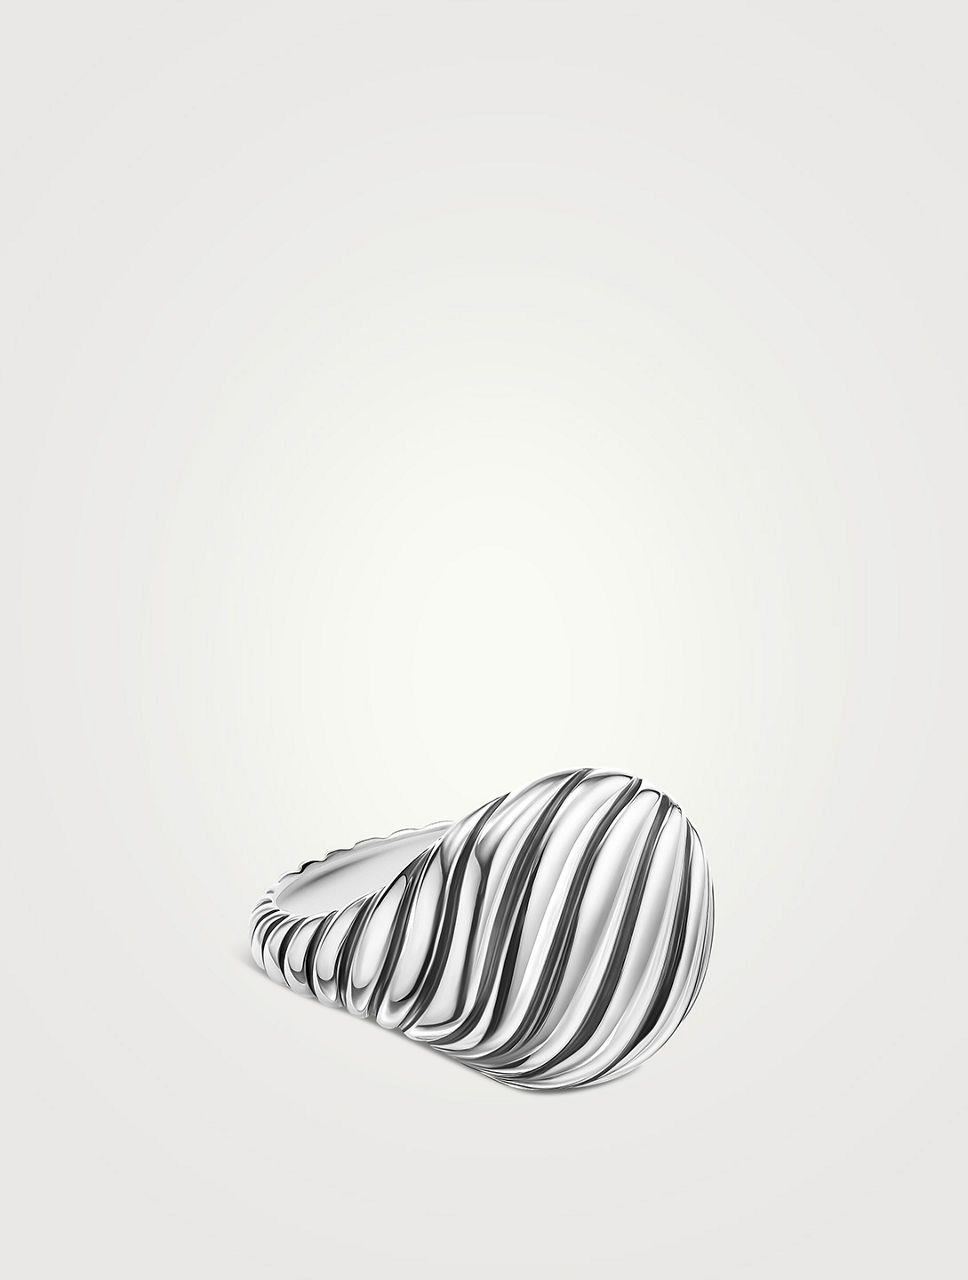 Sculpted Cable Pinky Ring Sterling Silver